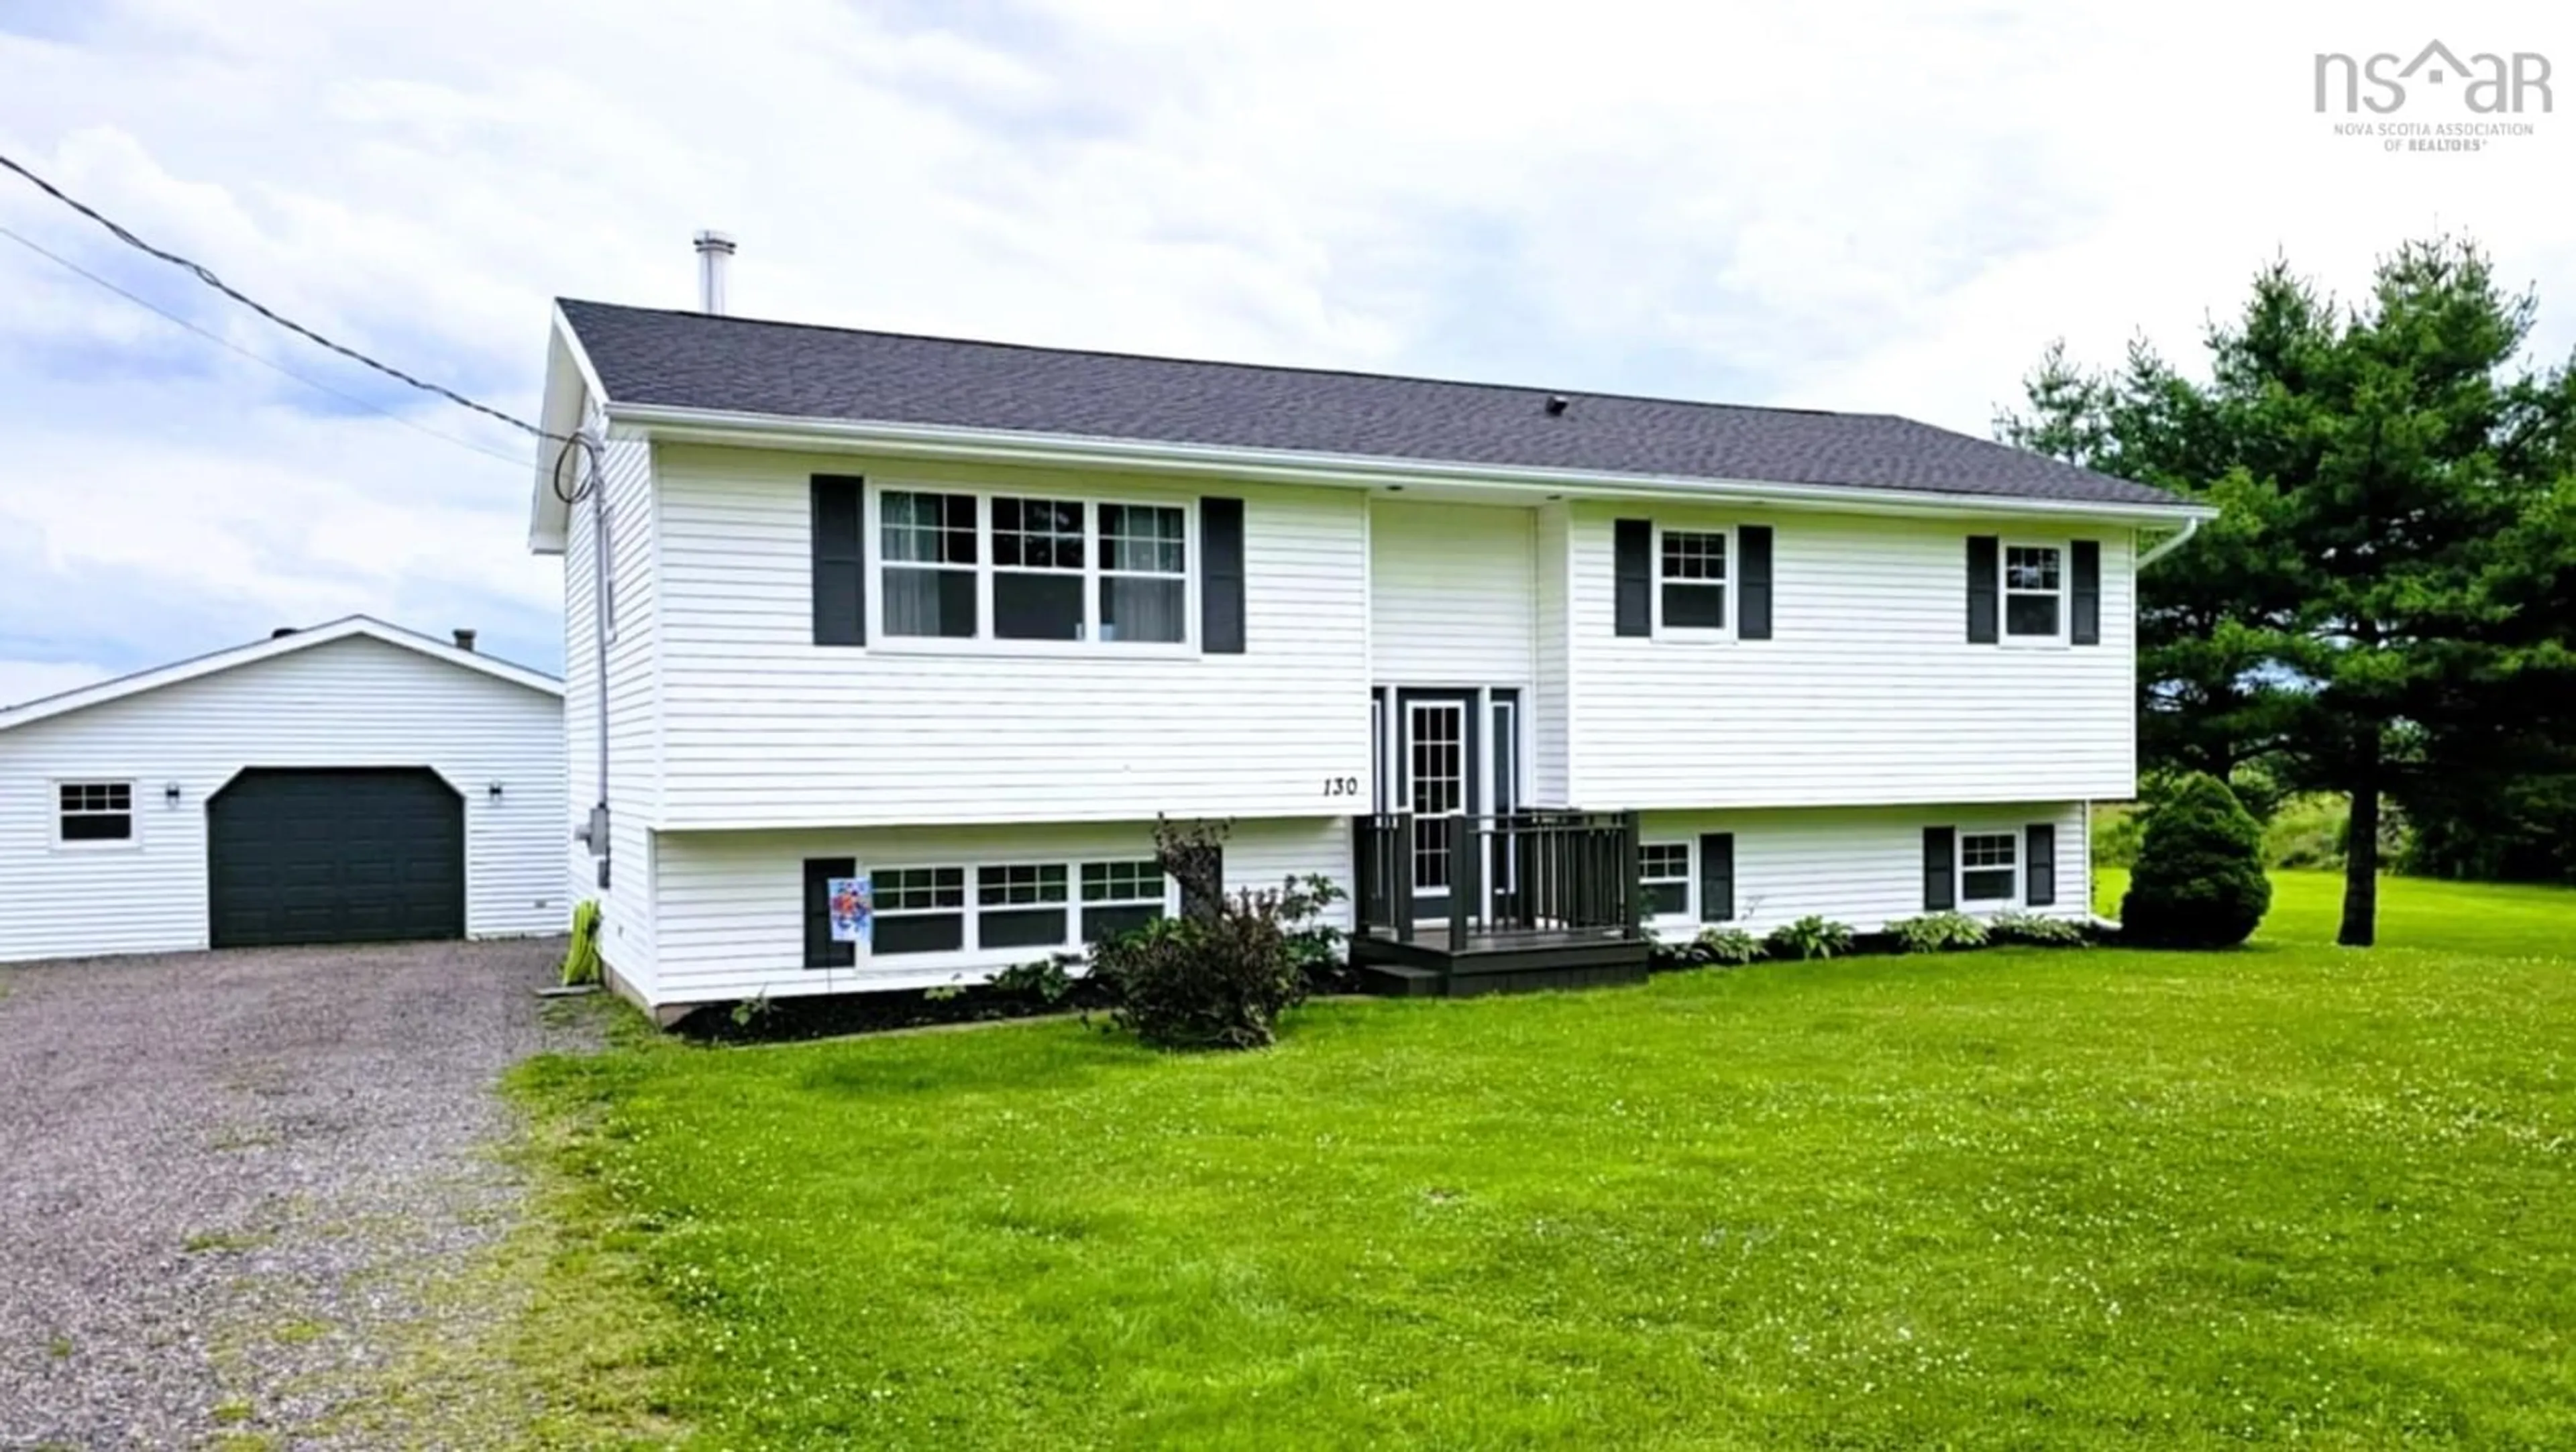 Home with vinyl exterior material for 130 Mountain Lee Rd, North River Nova Scotia B6L 6M2